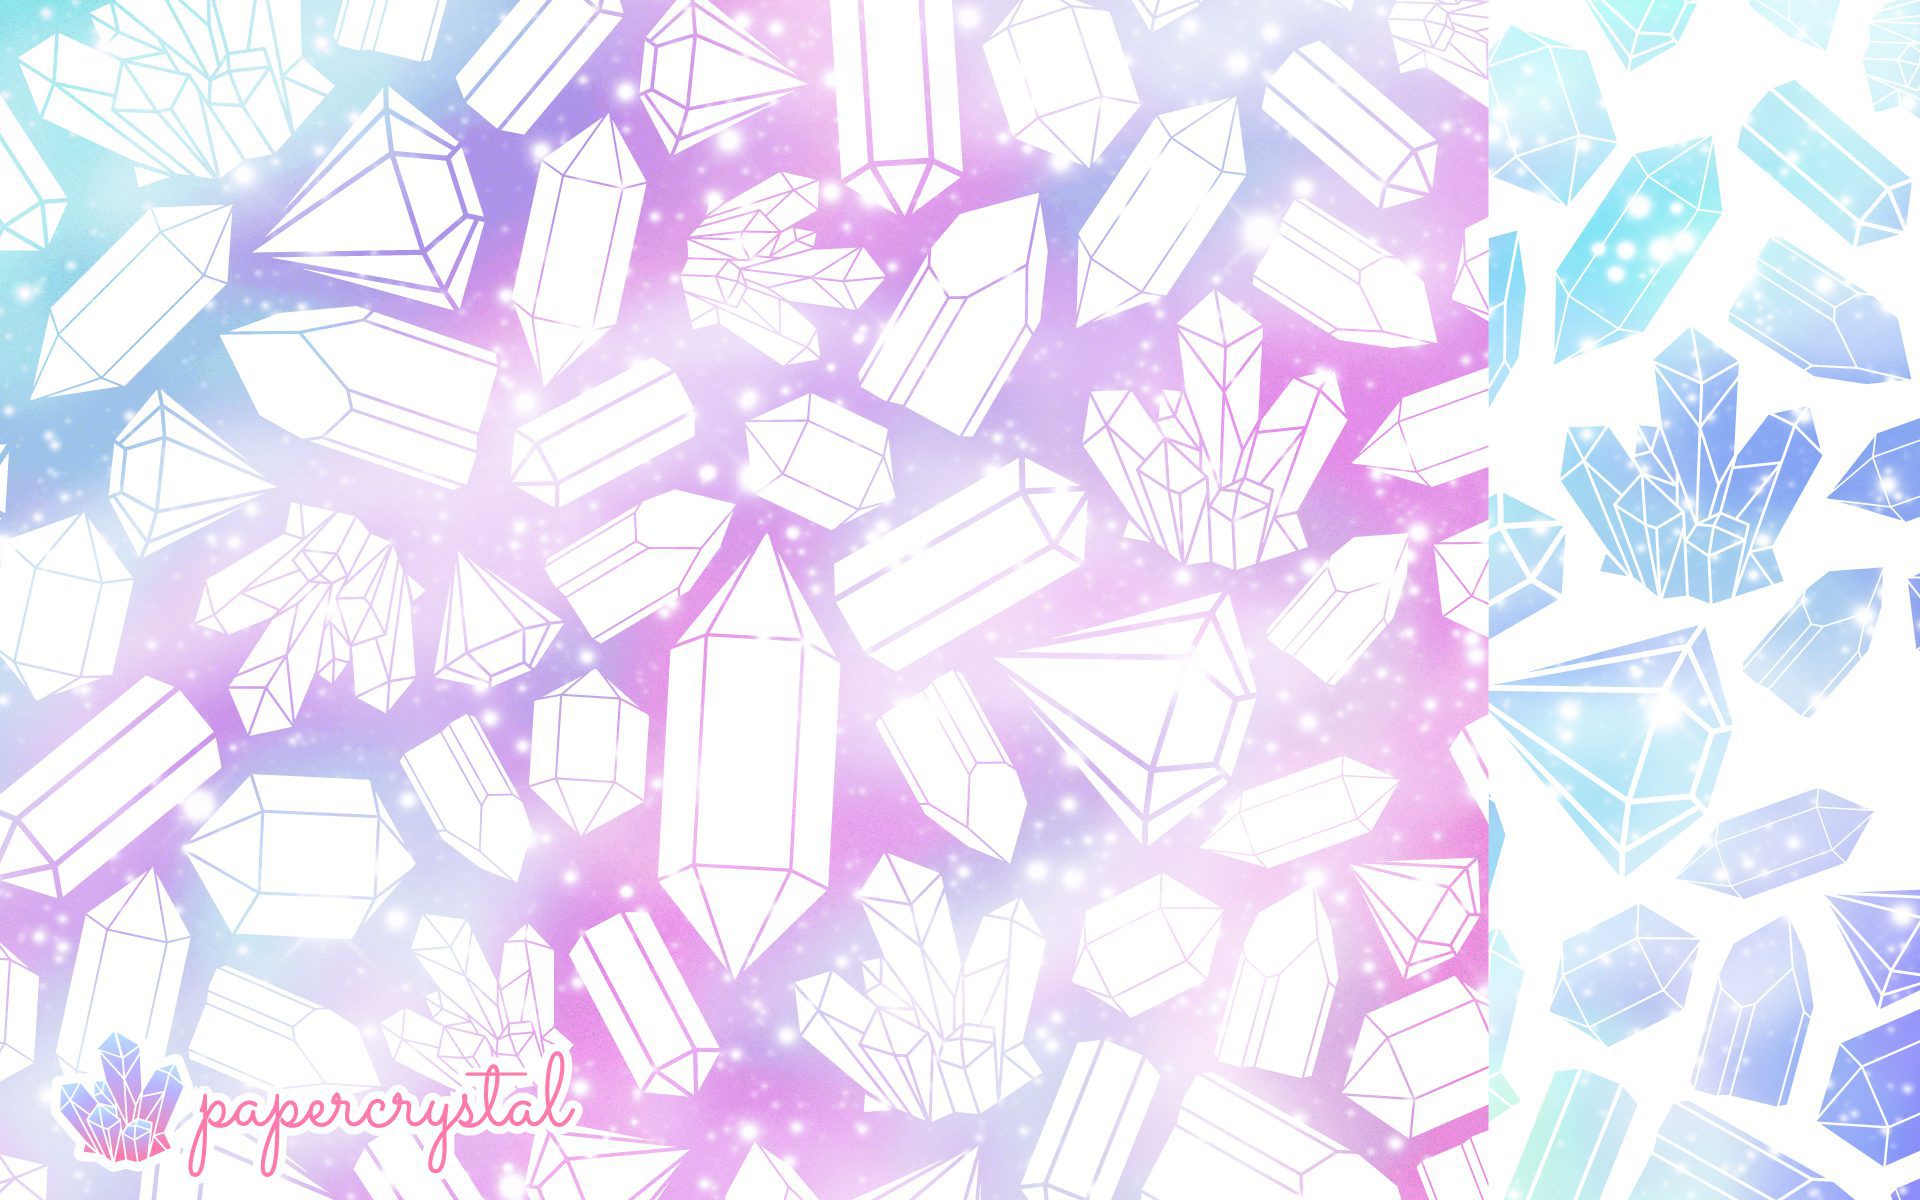 Free Printable Origami Paper - Crystal Galaxy Pattern